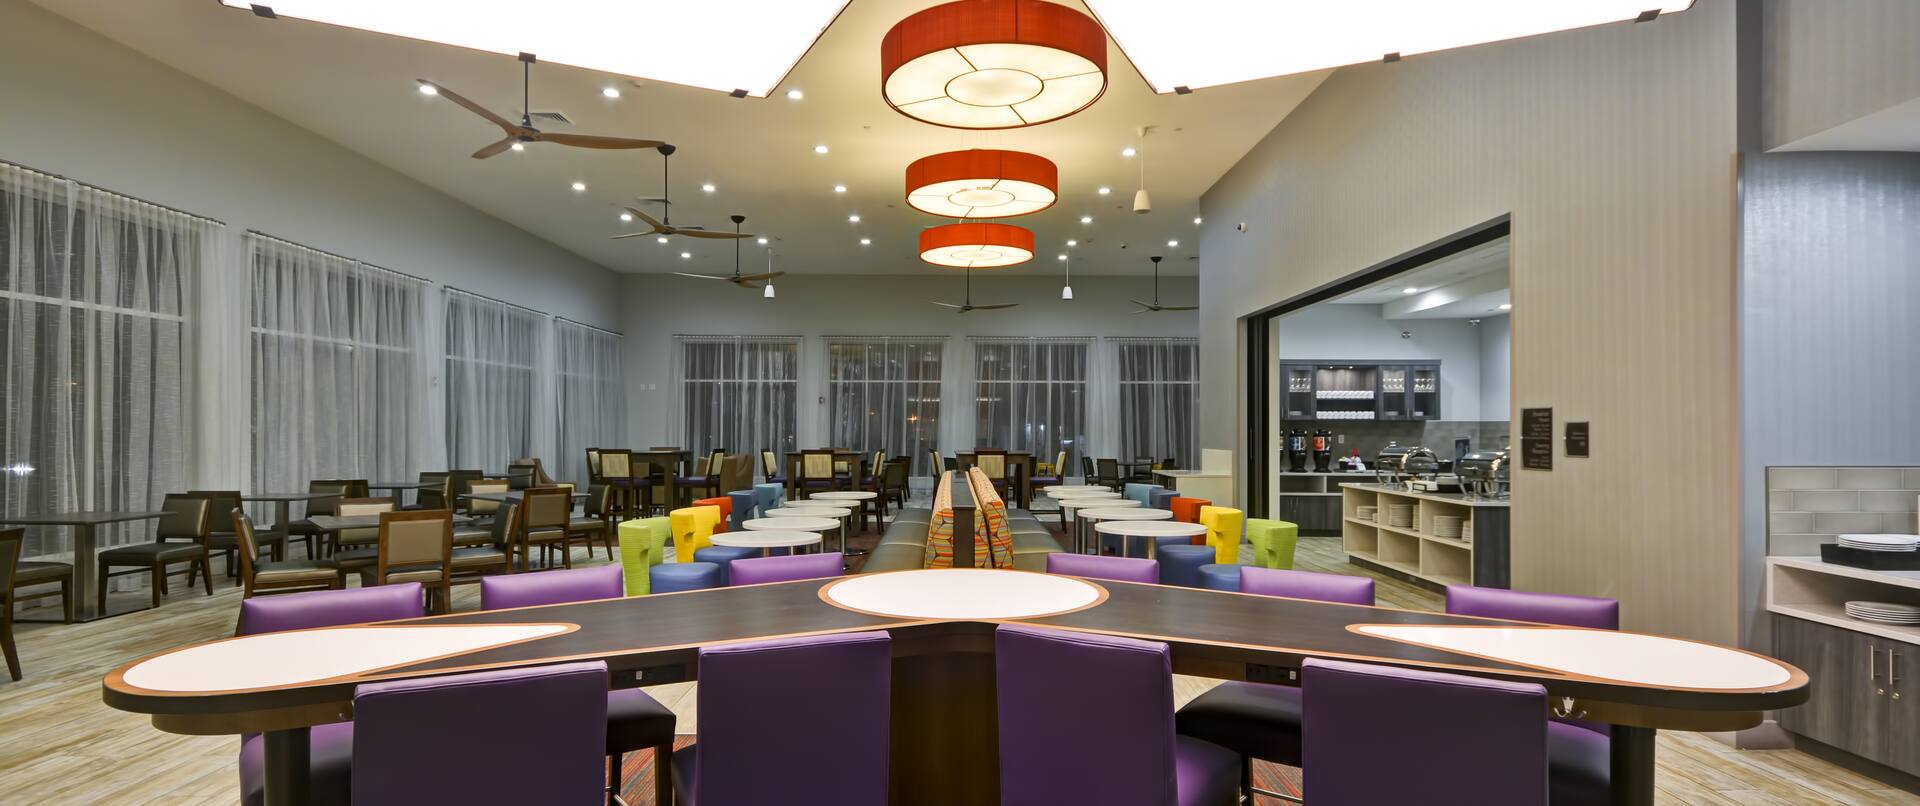 Homewood Suites by Hilton Orlando Theme Parks - Community Table with Purple Chairs